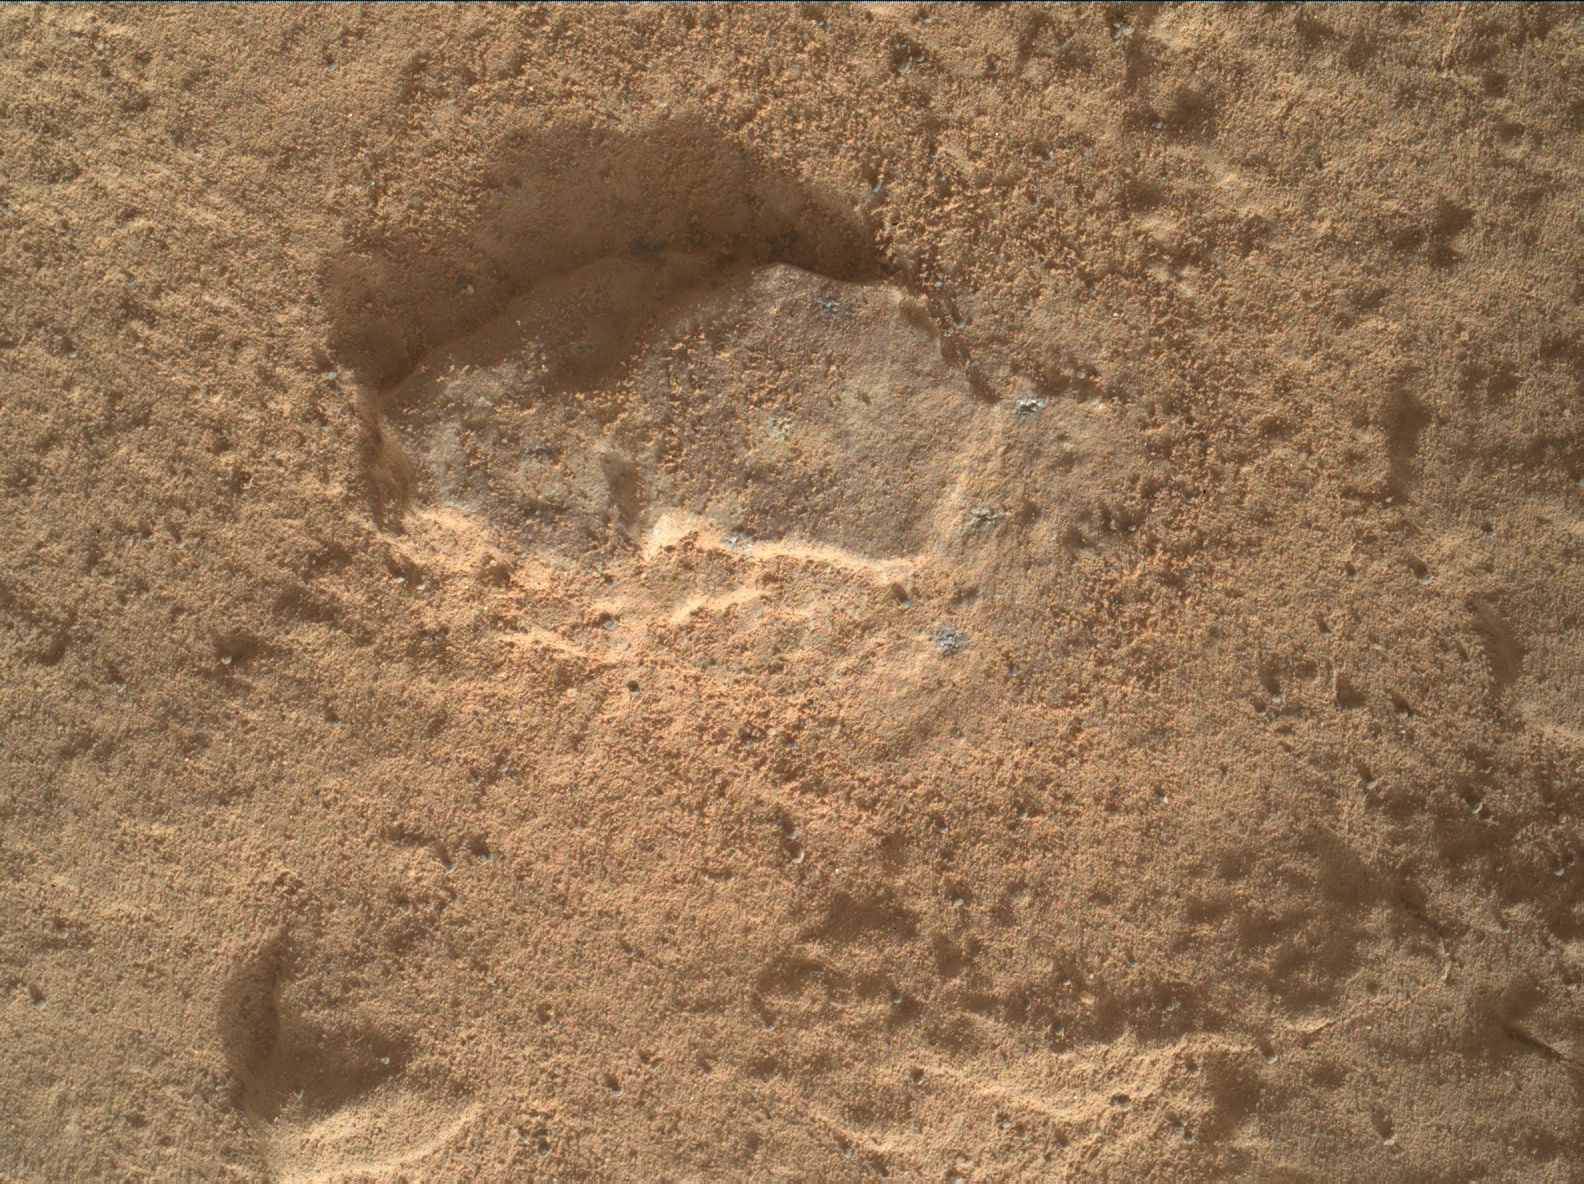 Nasa's Mars rover Curiosity acquired this image using its Mars Hand Lens Imager (MAHLI) on Sol 2574